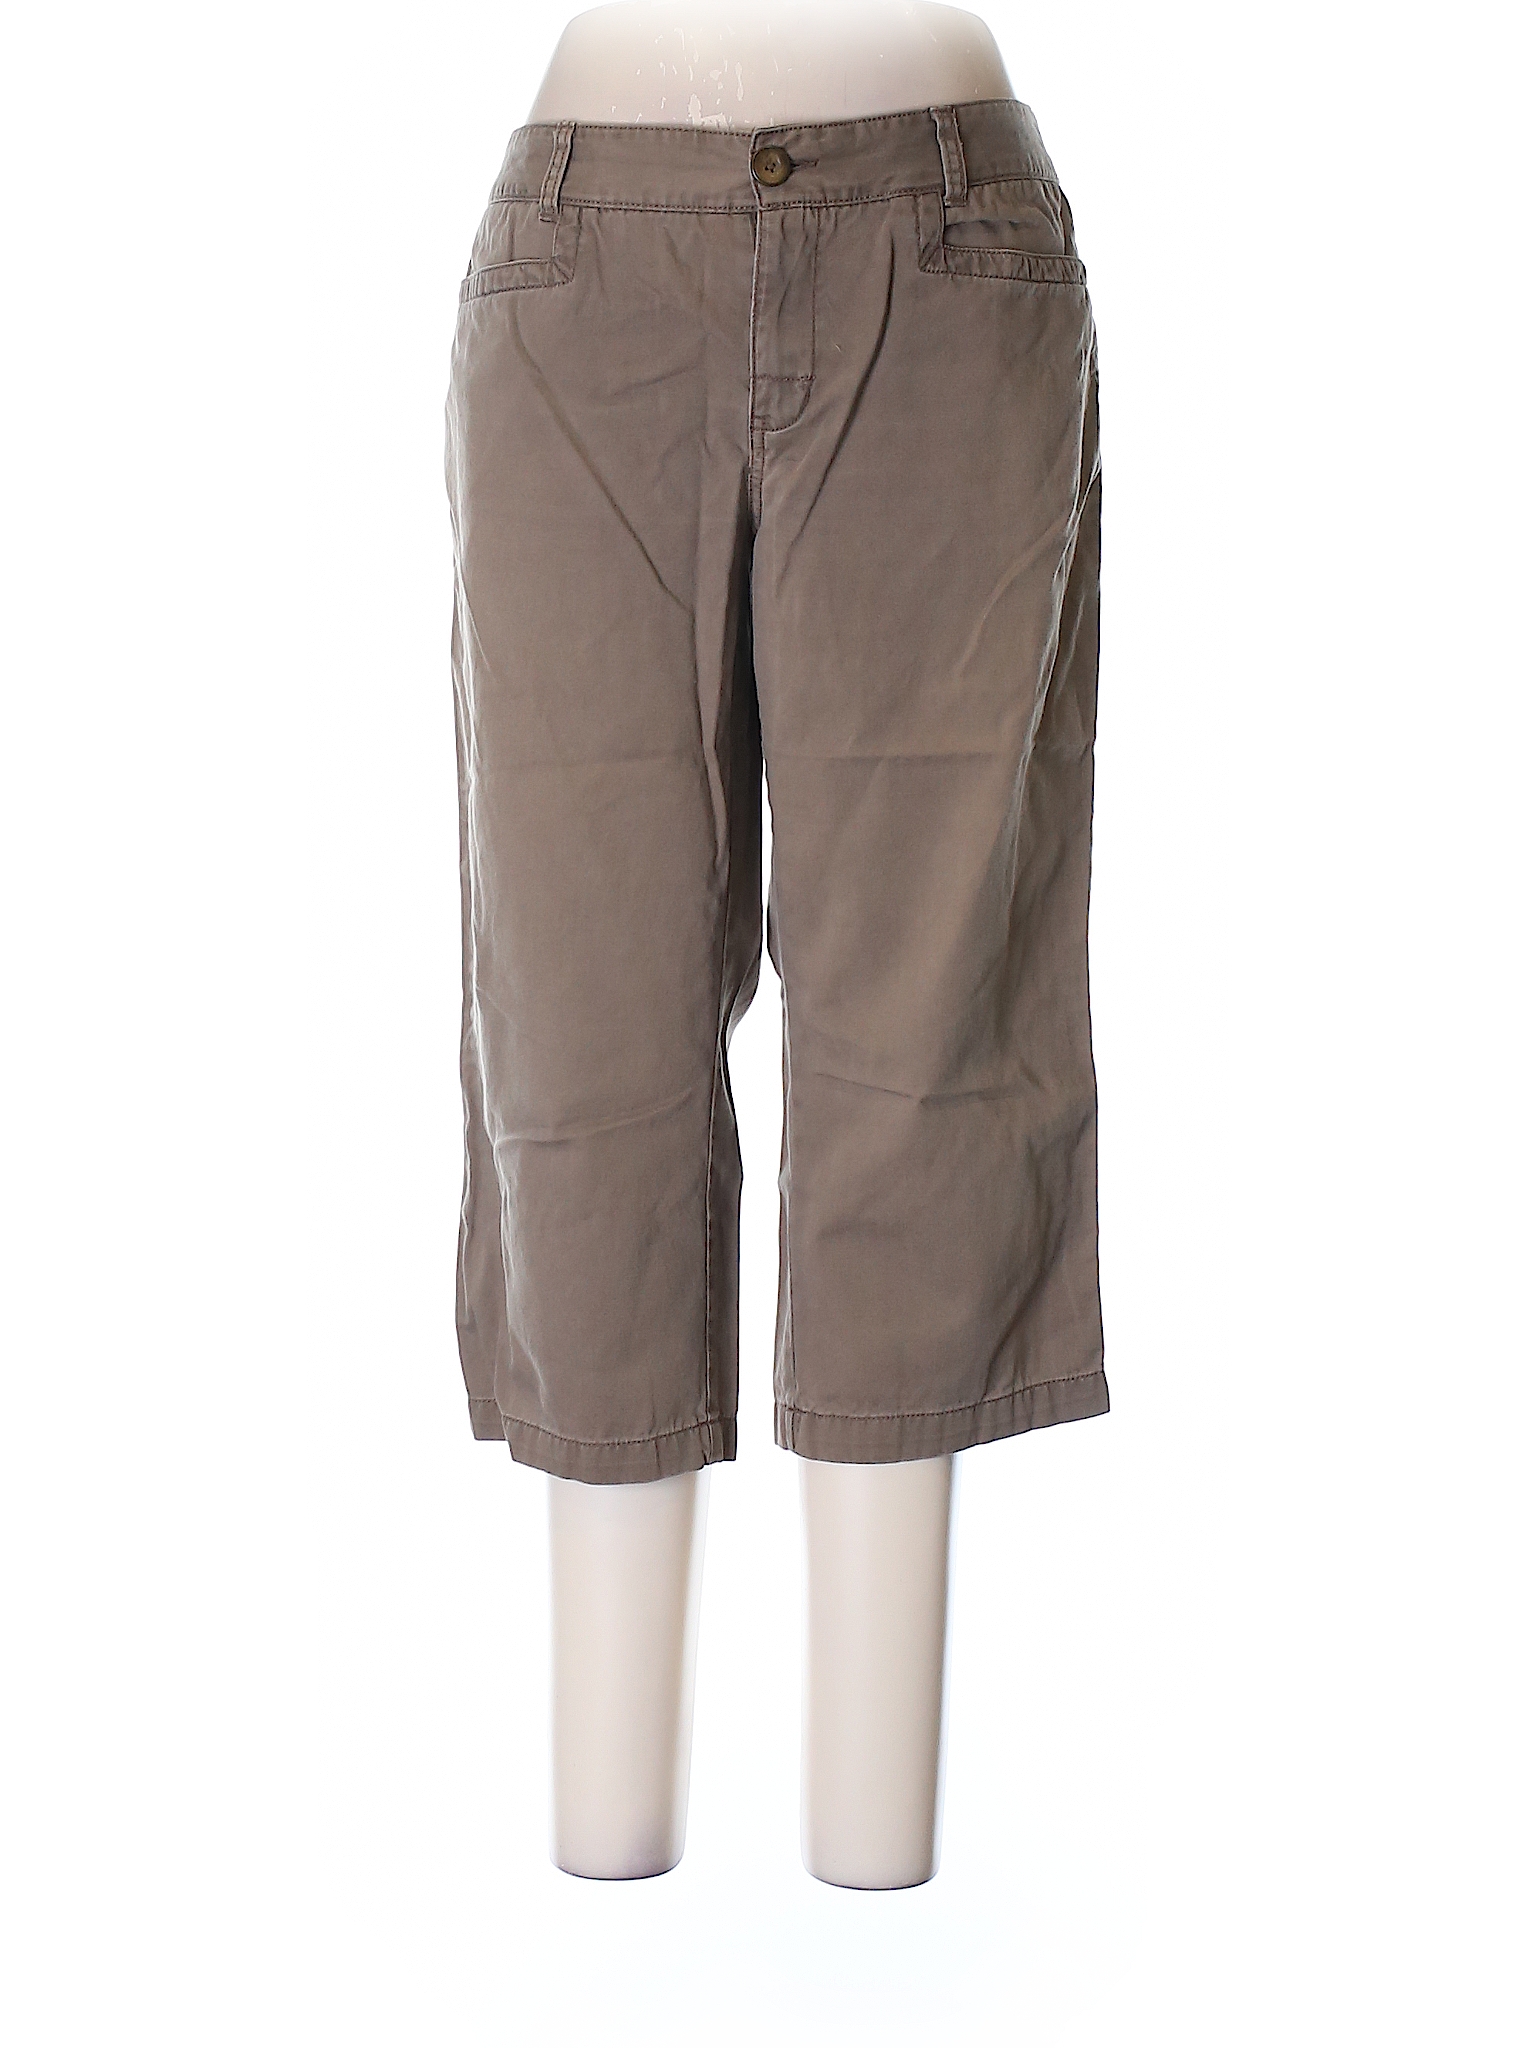 Eddie Bauer Casual Pants - 72% off only on thredUP